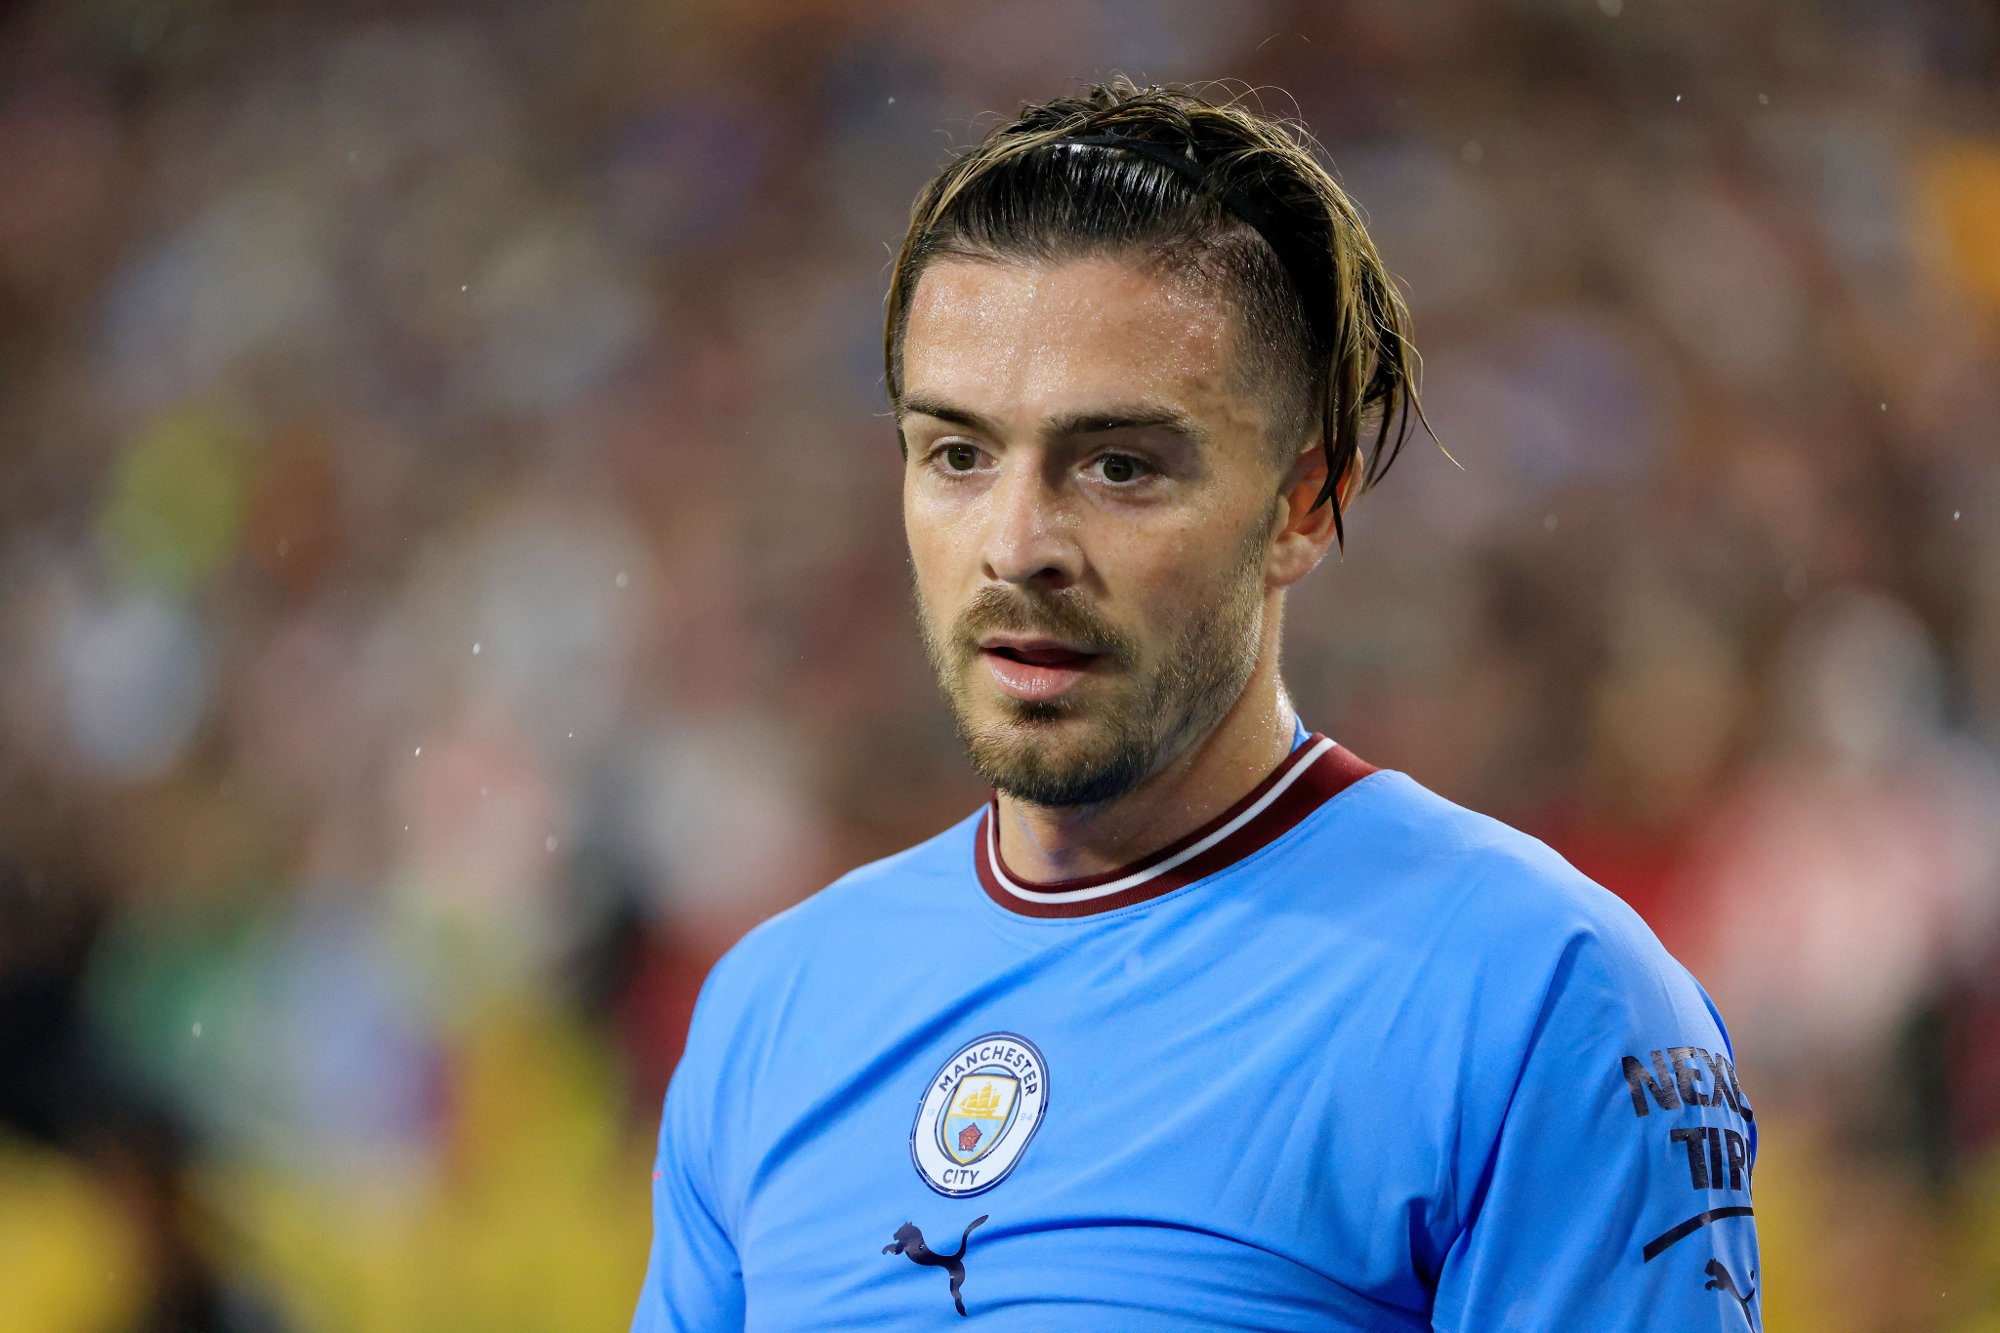 Football, Manchester City |  Grealish reacts to the site: - F*** ih ******!